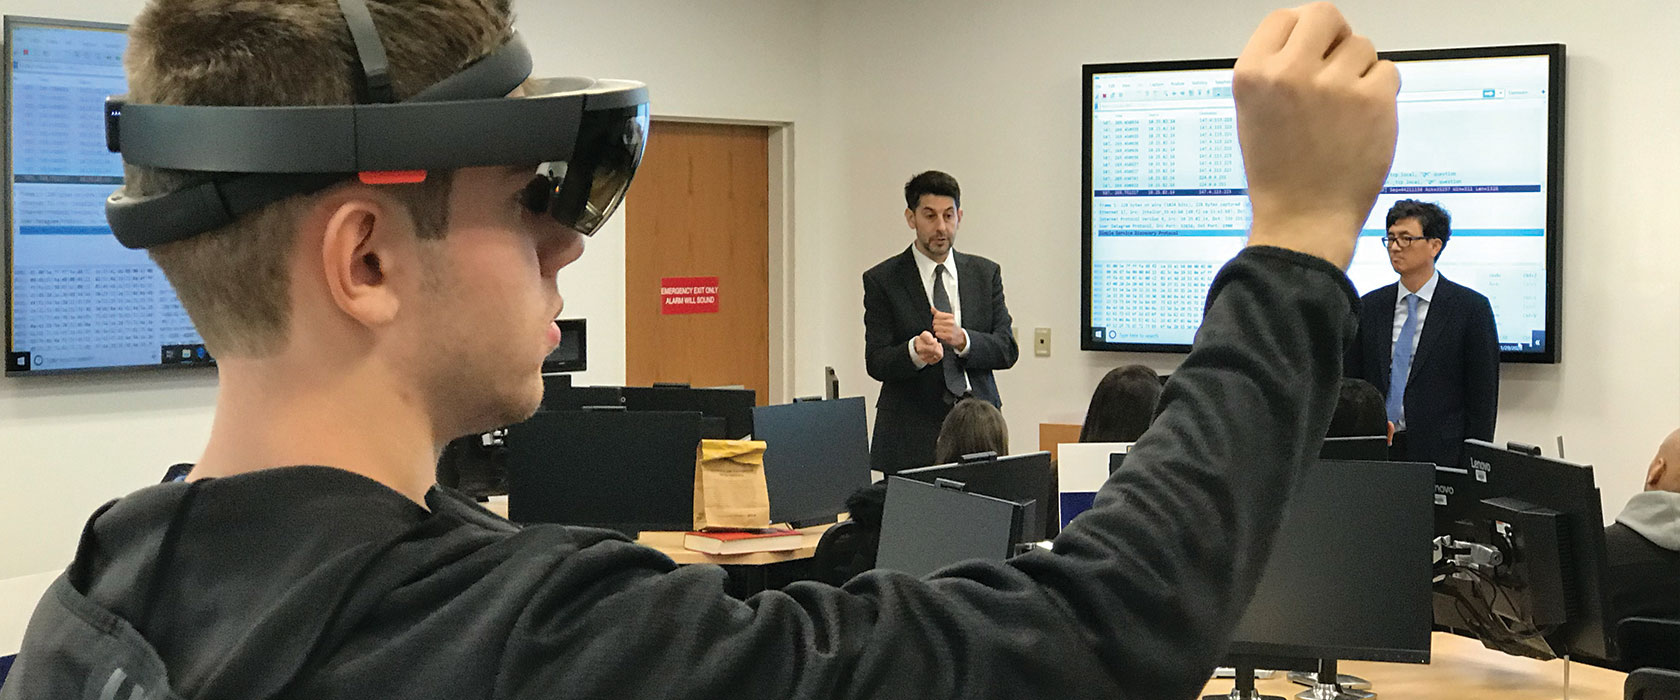 Legal Technology Student Using Virtual Reality Googles in the Classroom